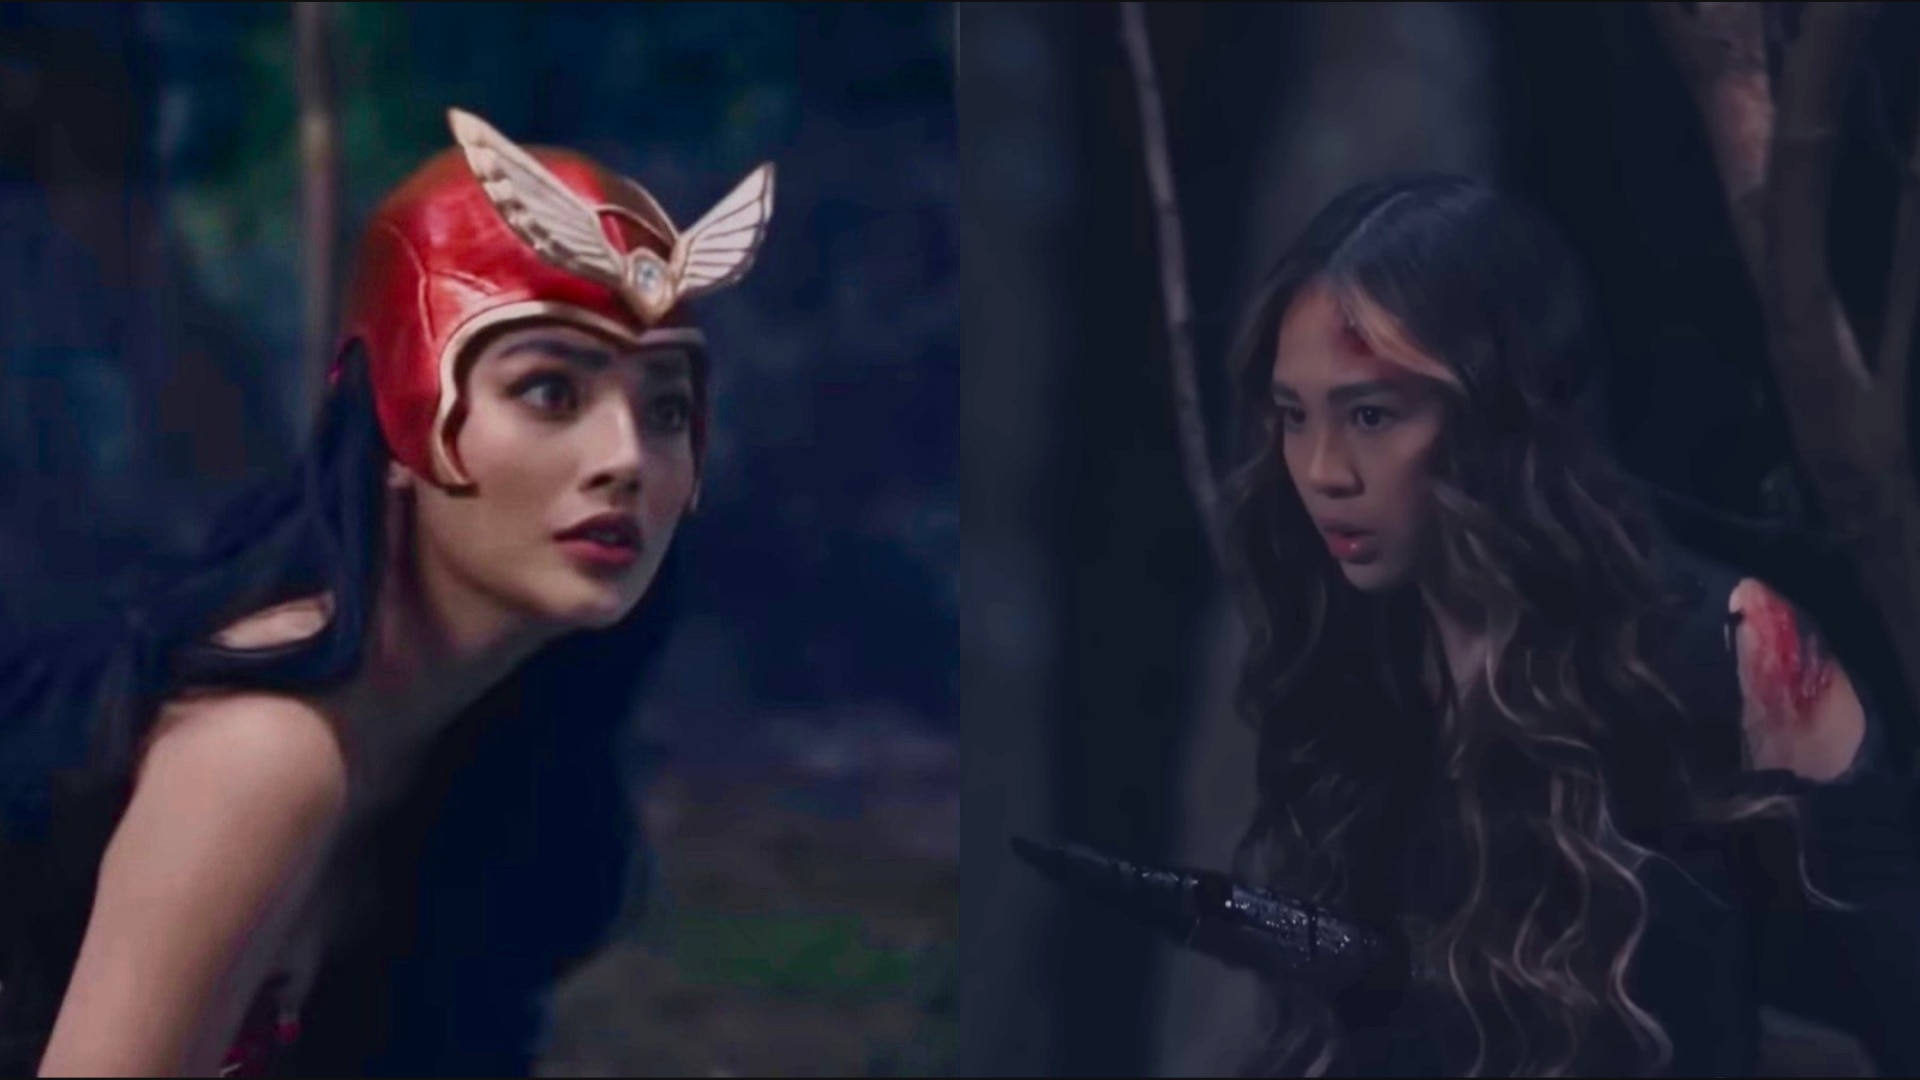 "Darna" trends as Valentina gets killed in explosion